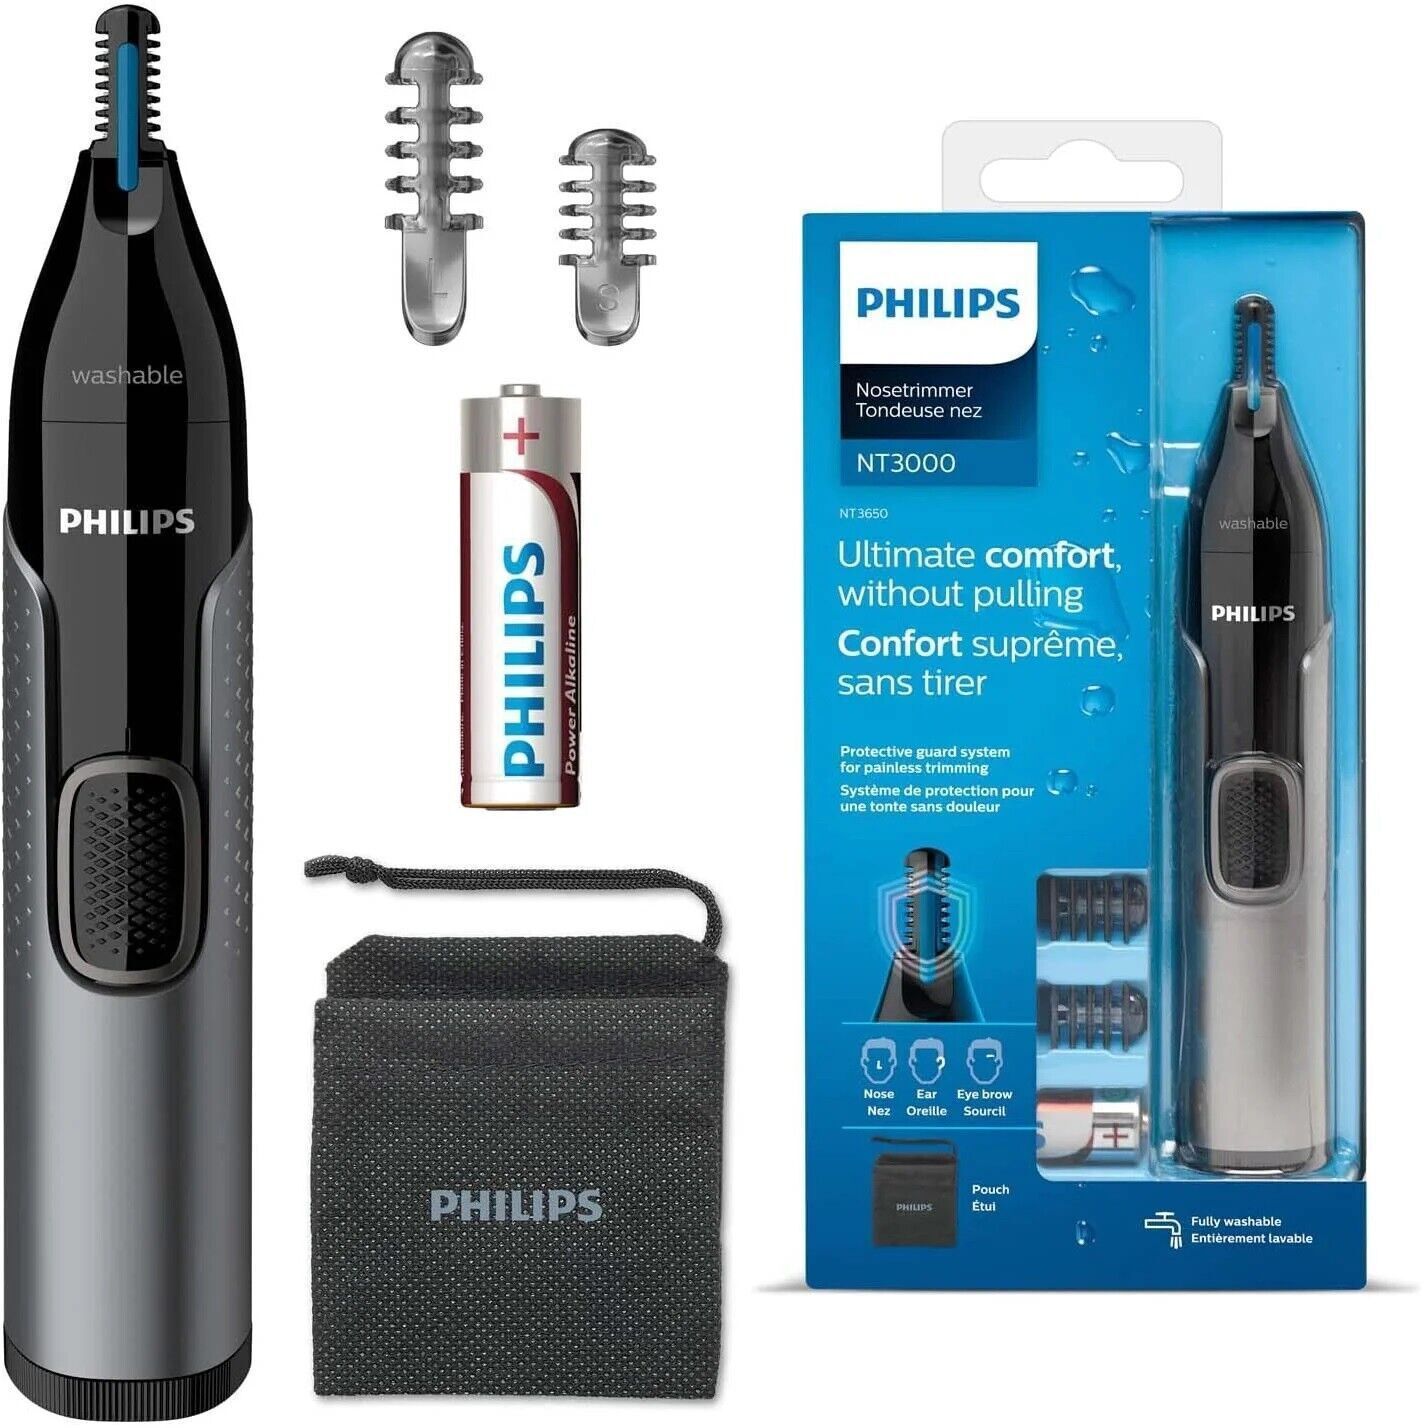 Primary image for Trimmer Philips Nase Nt3650/16 Ohr Augenbraue Schnurlos Serie 3000 Haare...